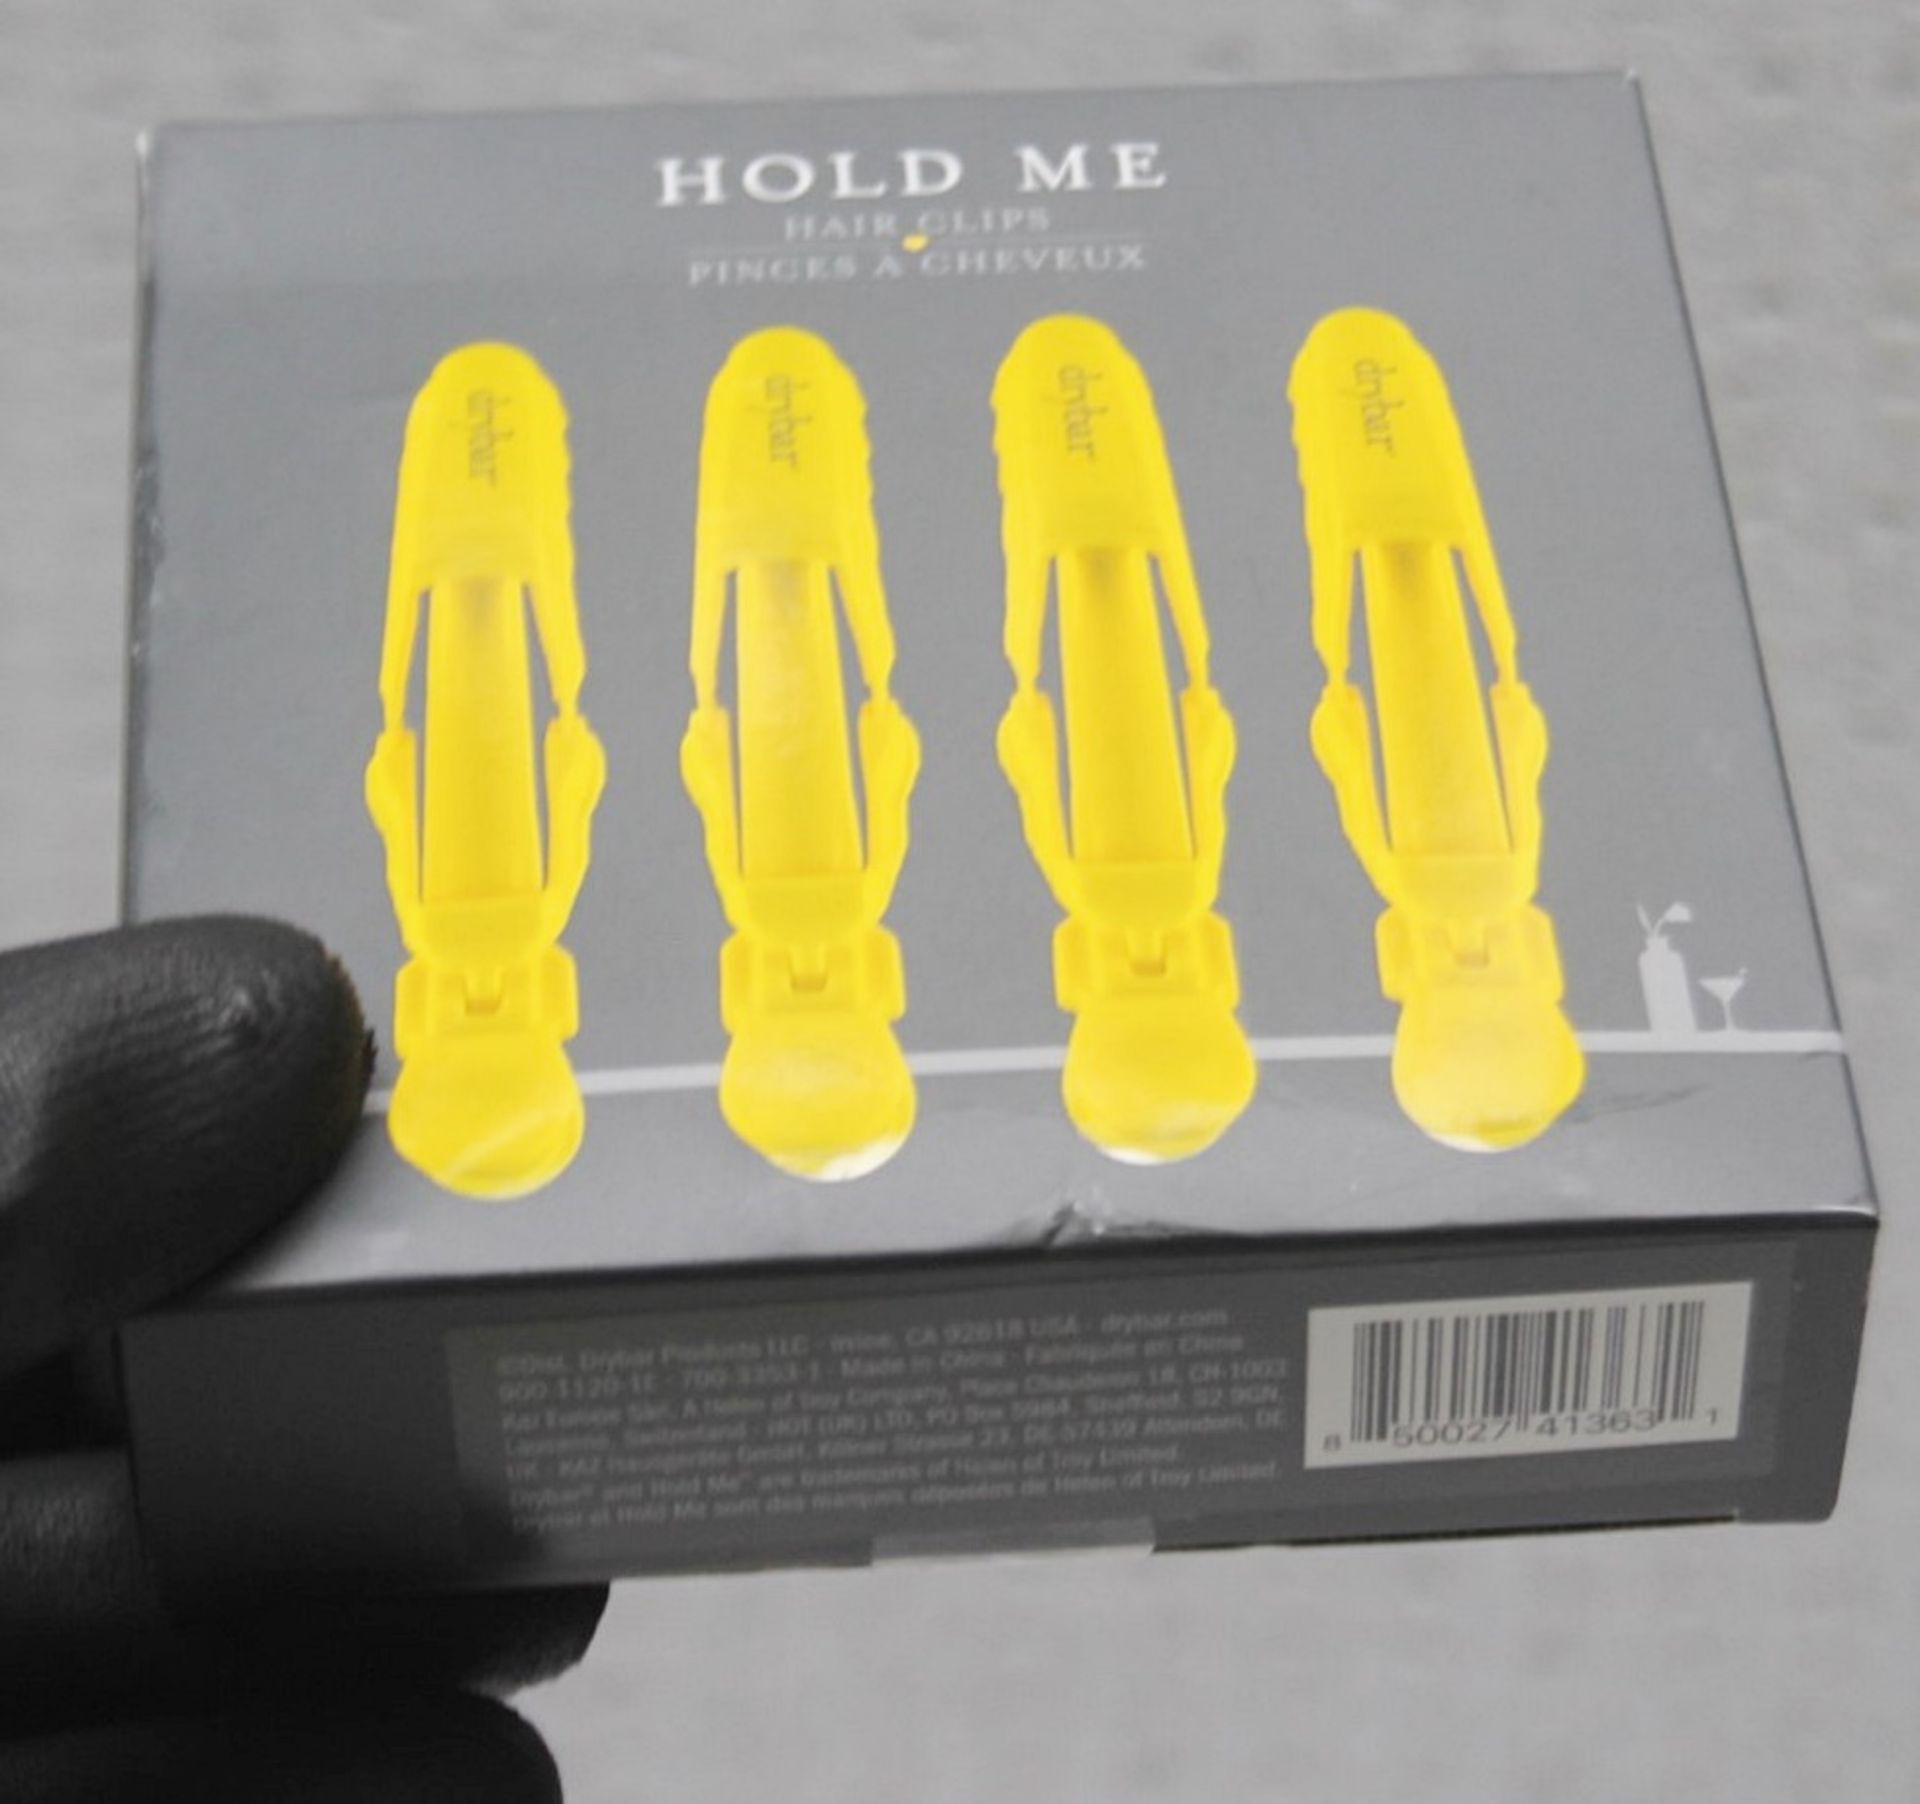 Set of 4 x DRYBAR 'Hold Me' Professional-grade Hair Clips - Sealed Boxed Stock - Image 2 of 3